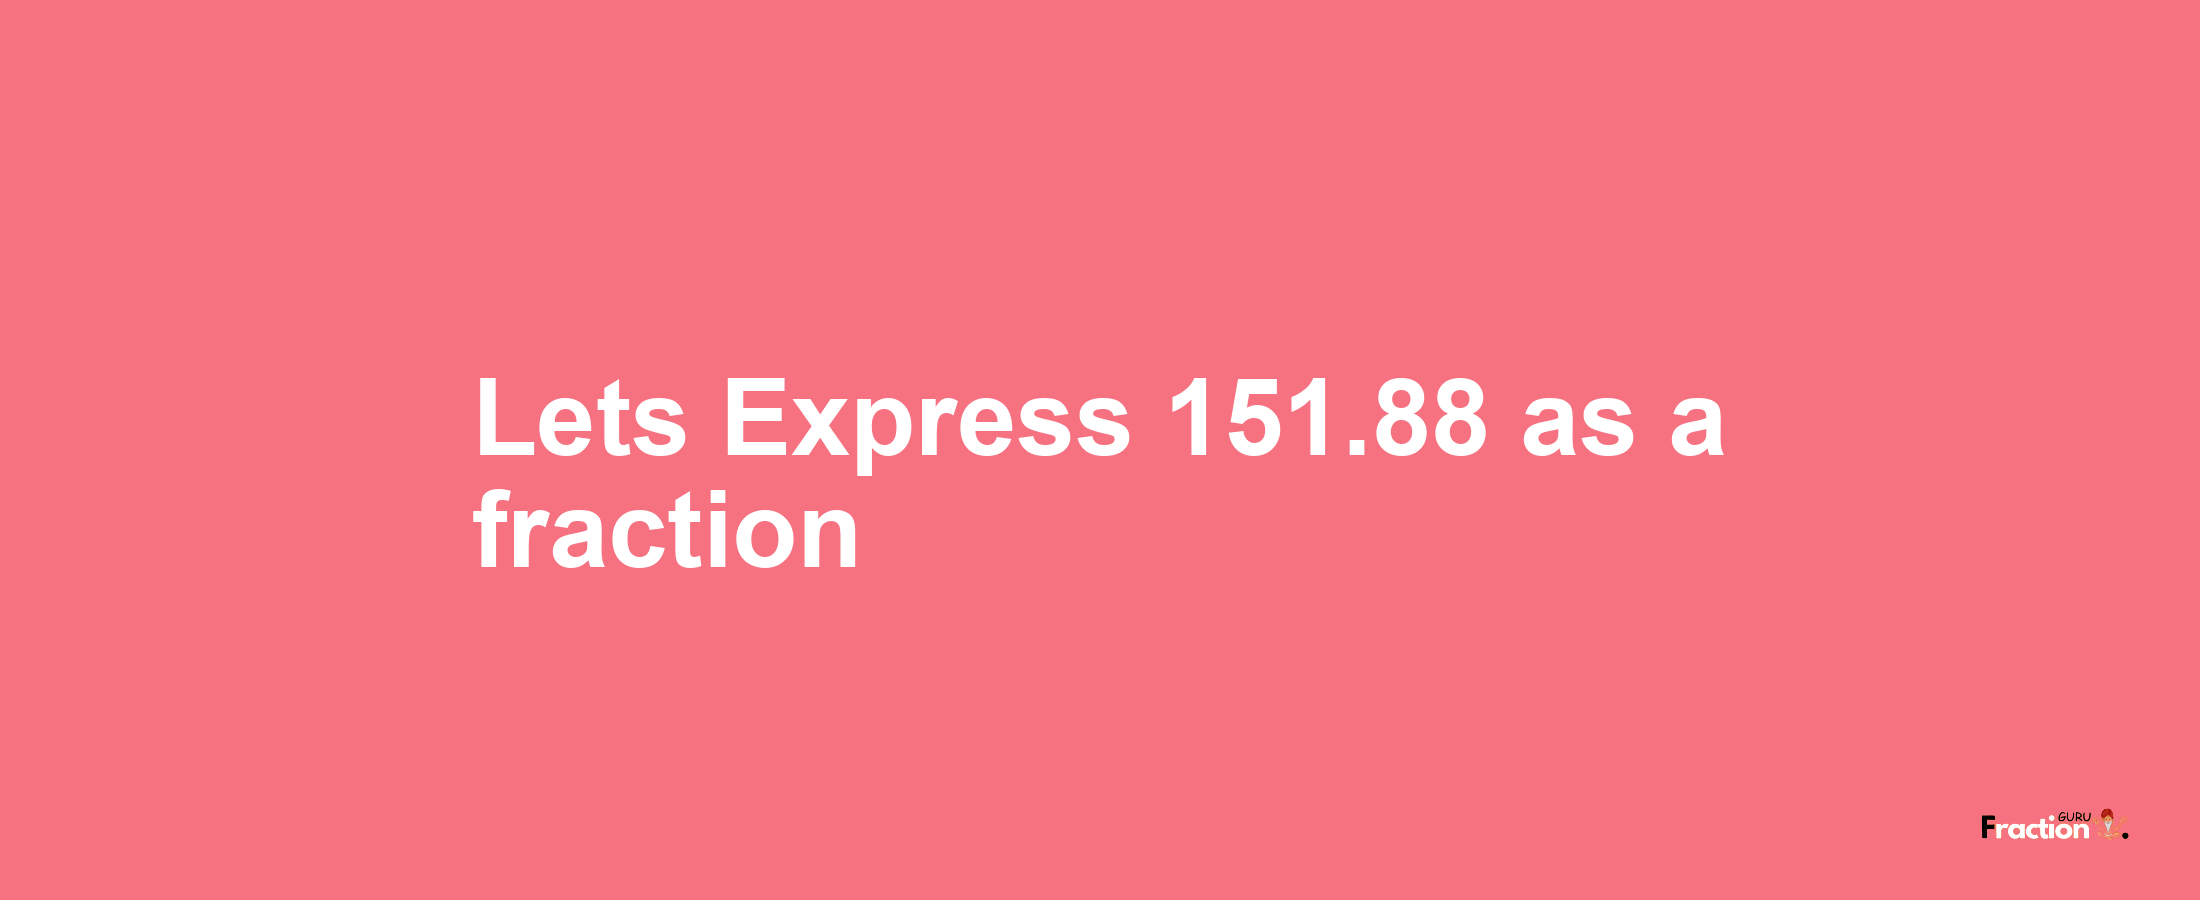 Lets Express 151.88 as afraction